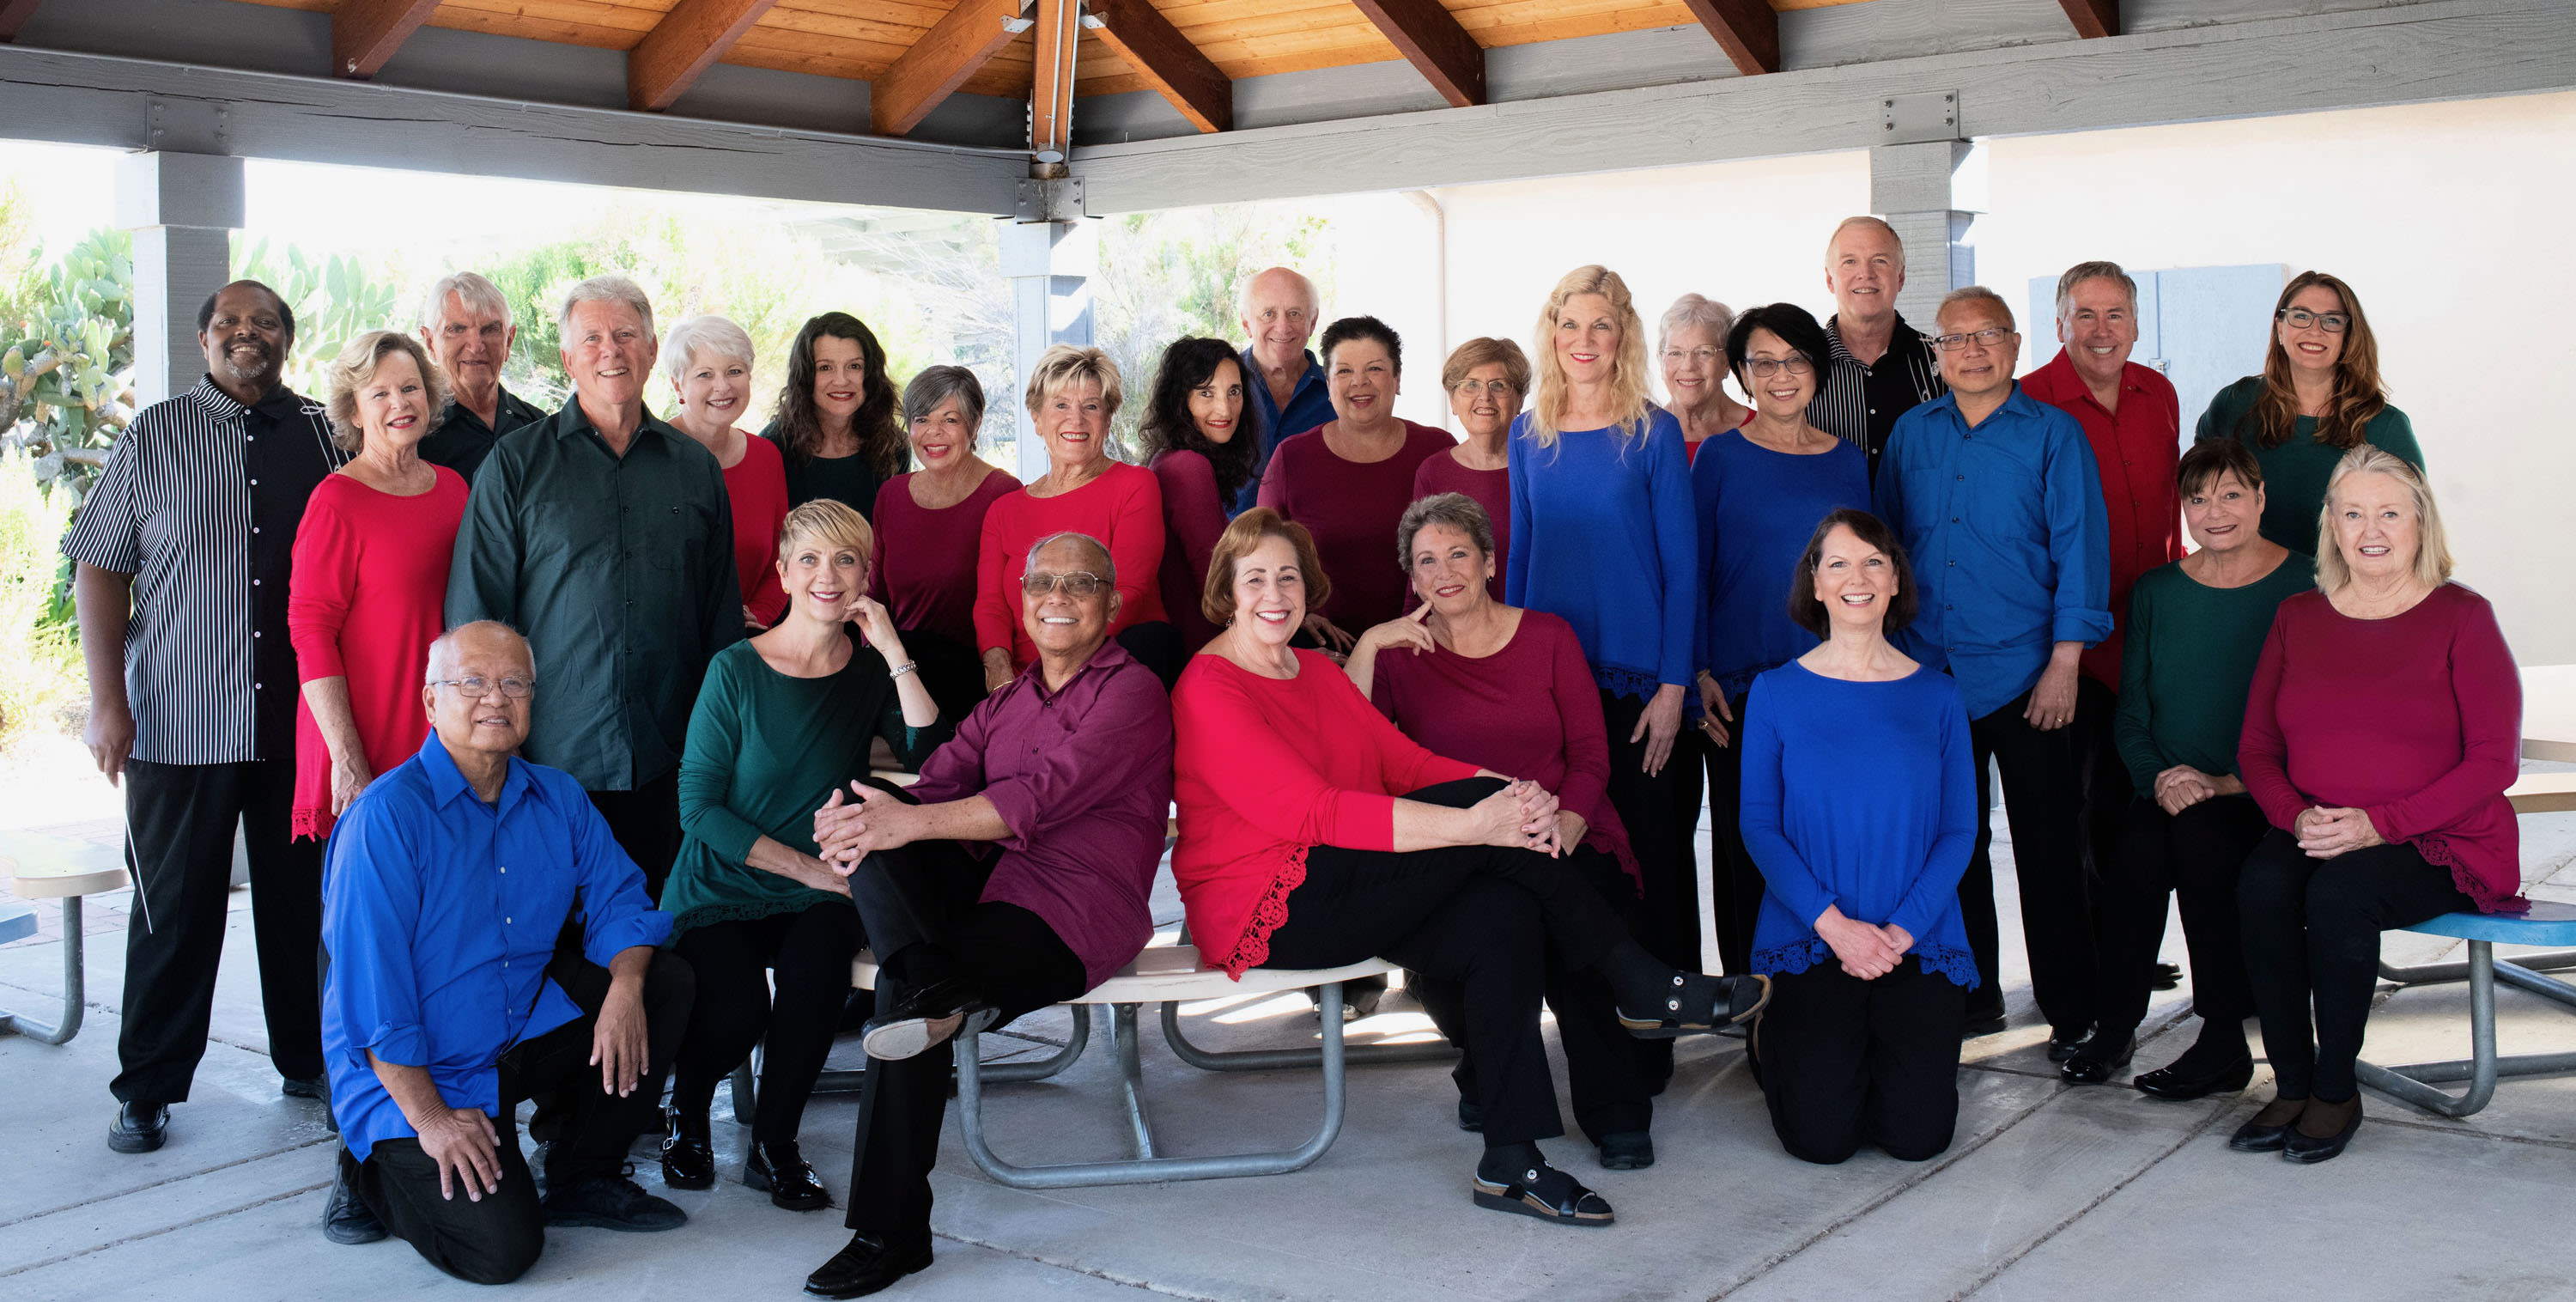 Wide range of music planned for San Diego Harmonic Chorale's concerts this weekend